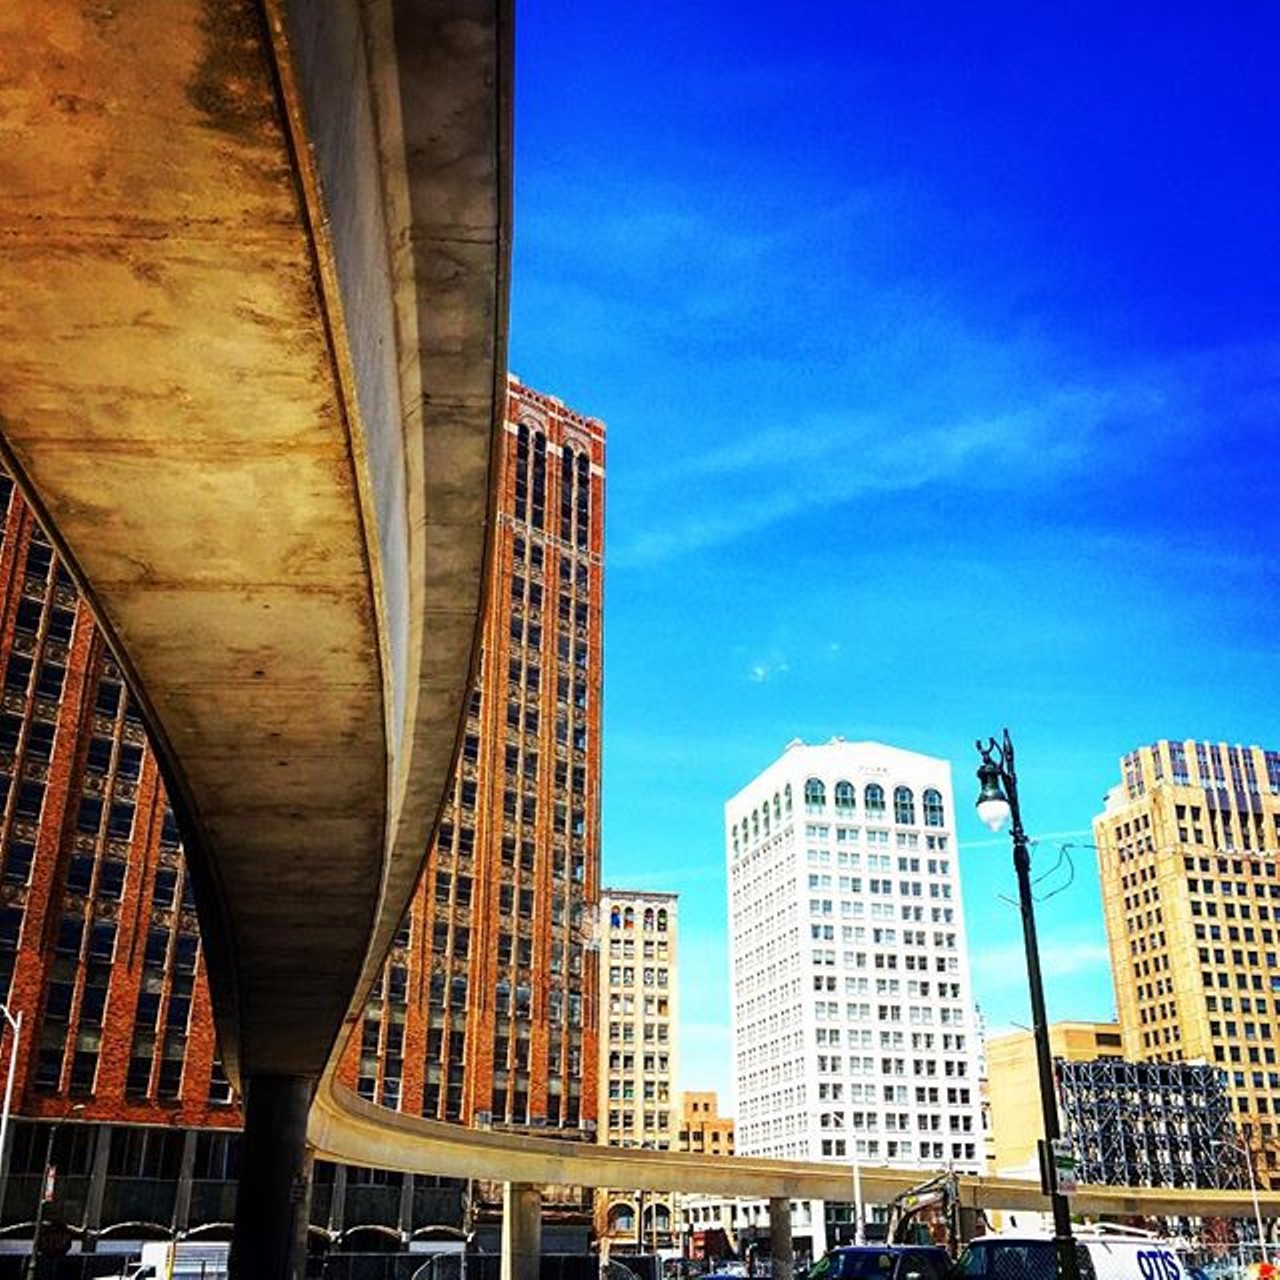 The winding tracks sure look cool, now if only they actually went somewhere.... (Photo via Instagram, @breatheindetroit)